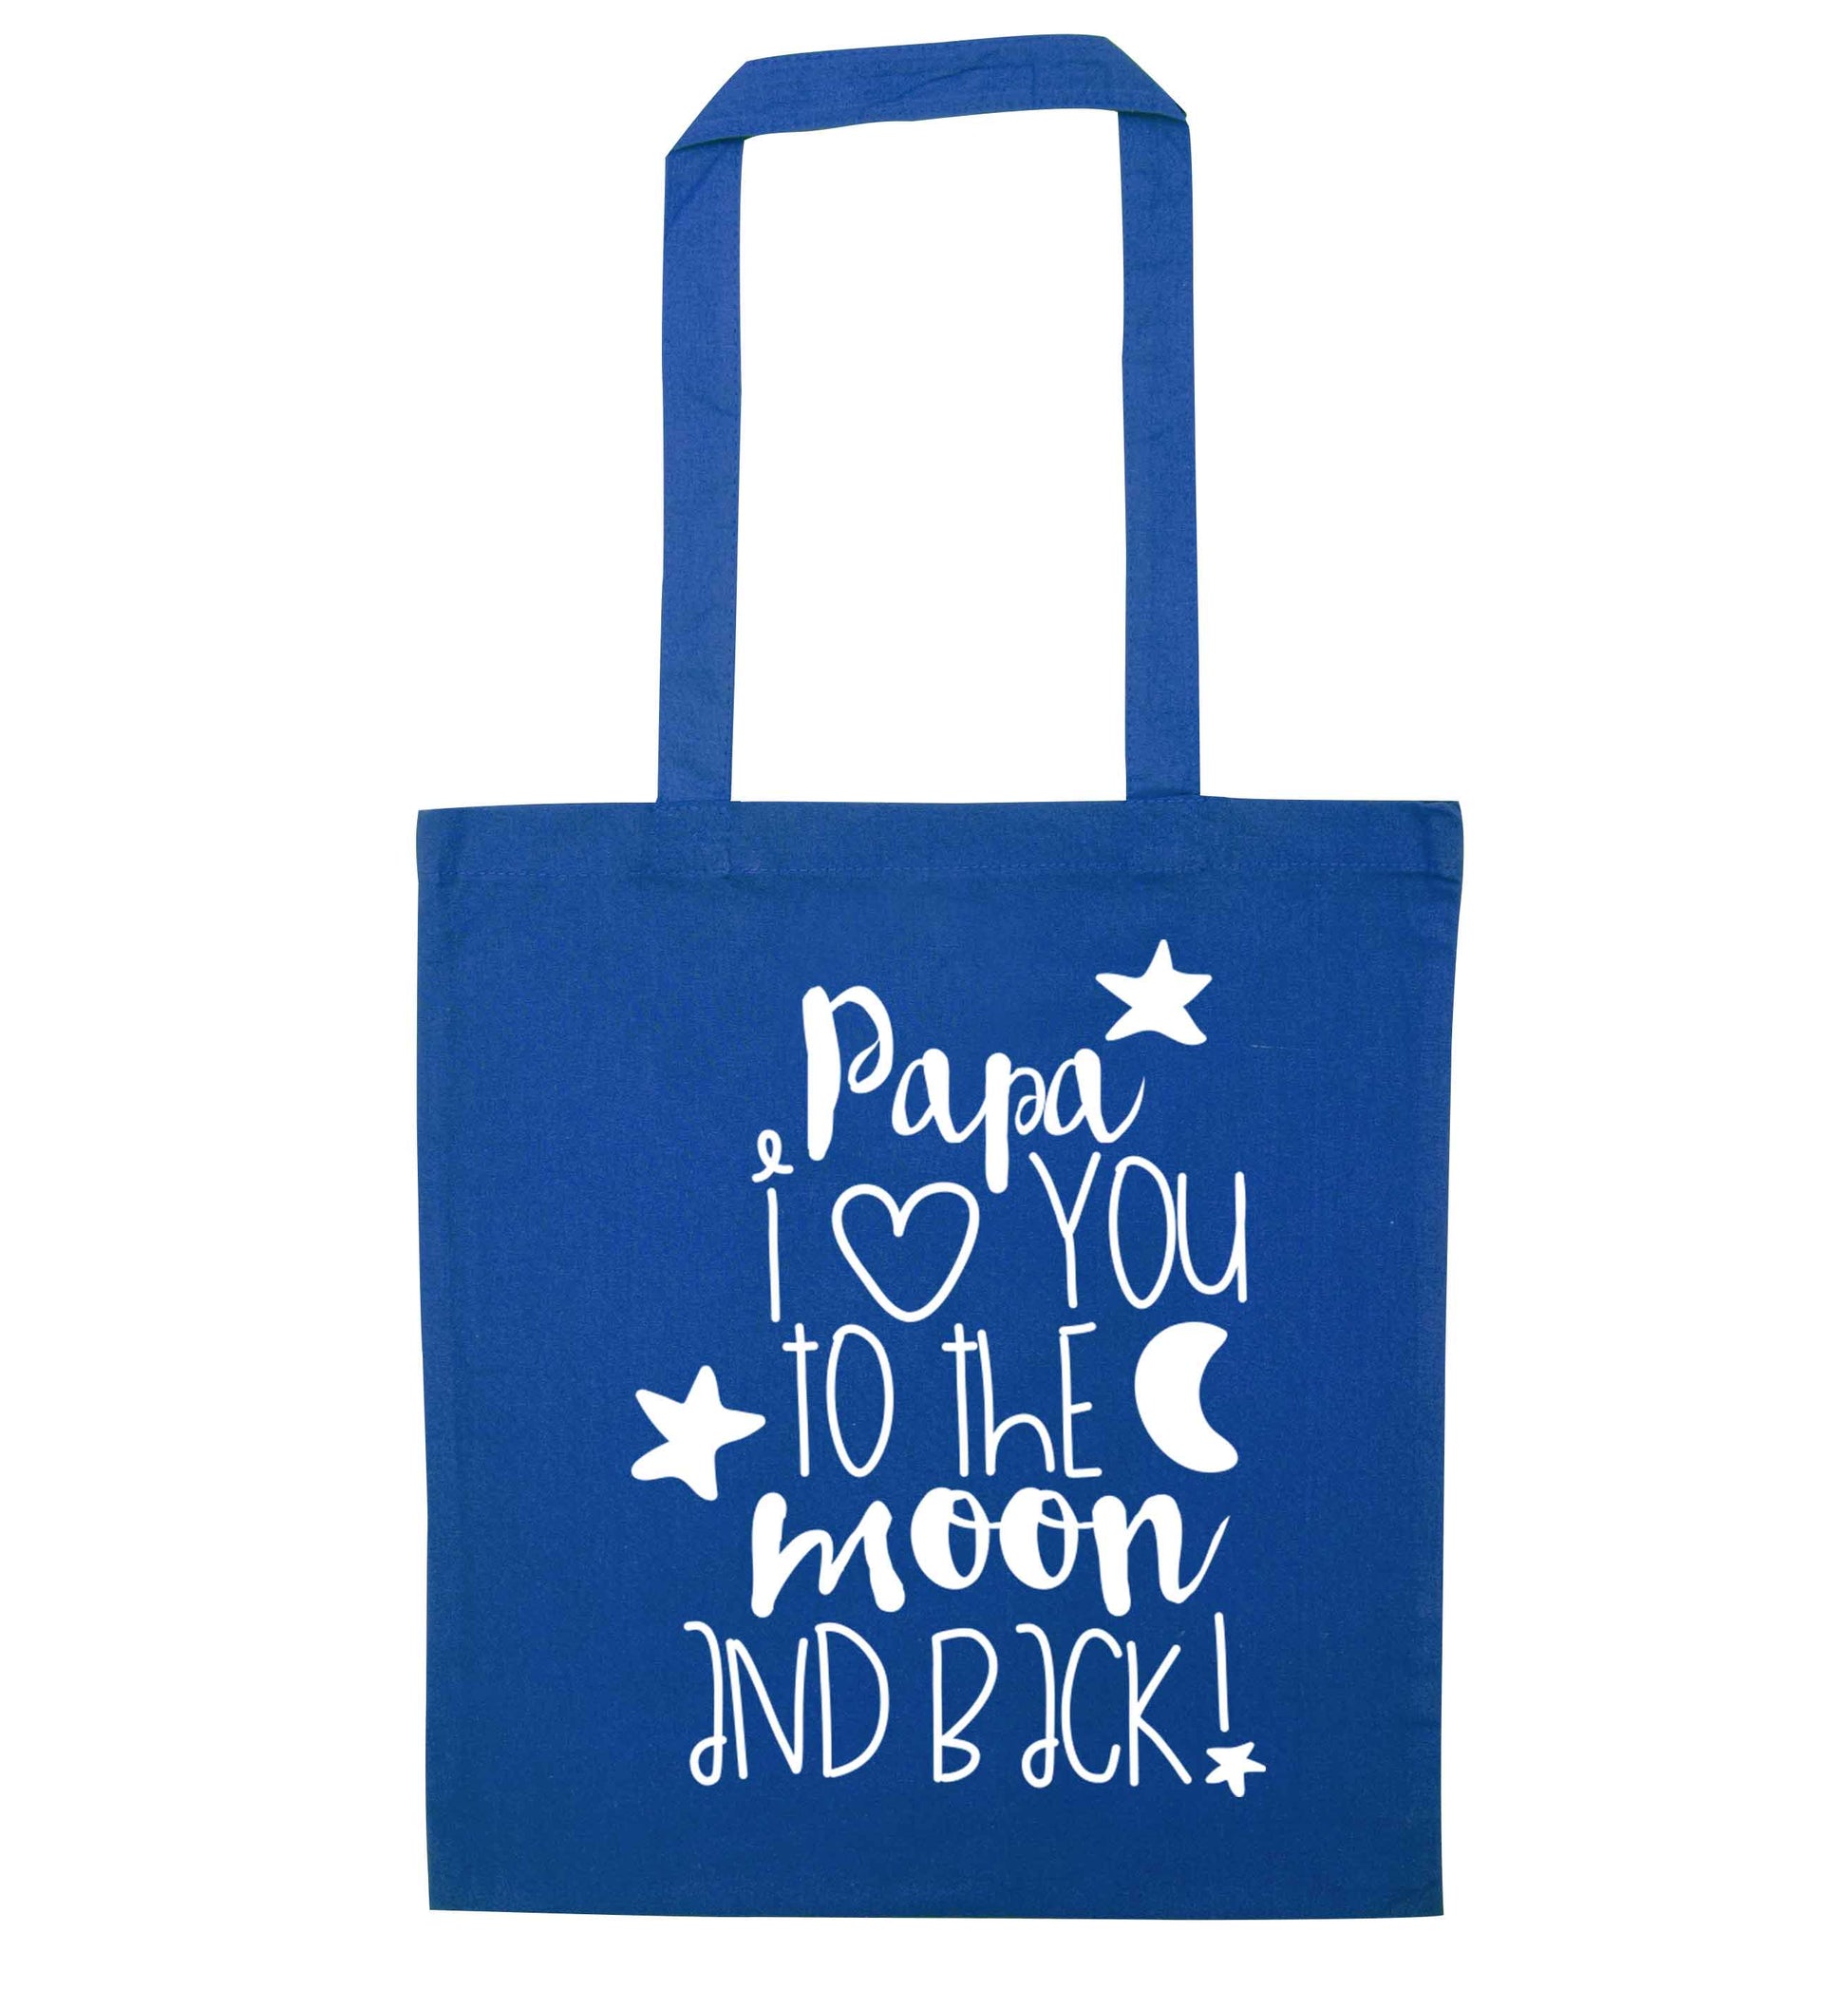 Papa I love you to the moon and back blue tote bag